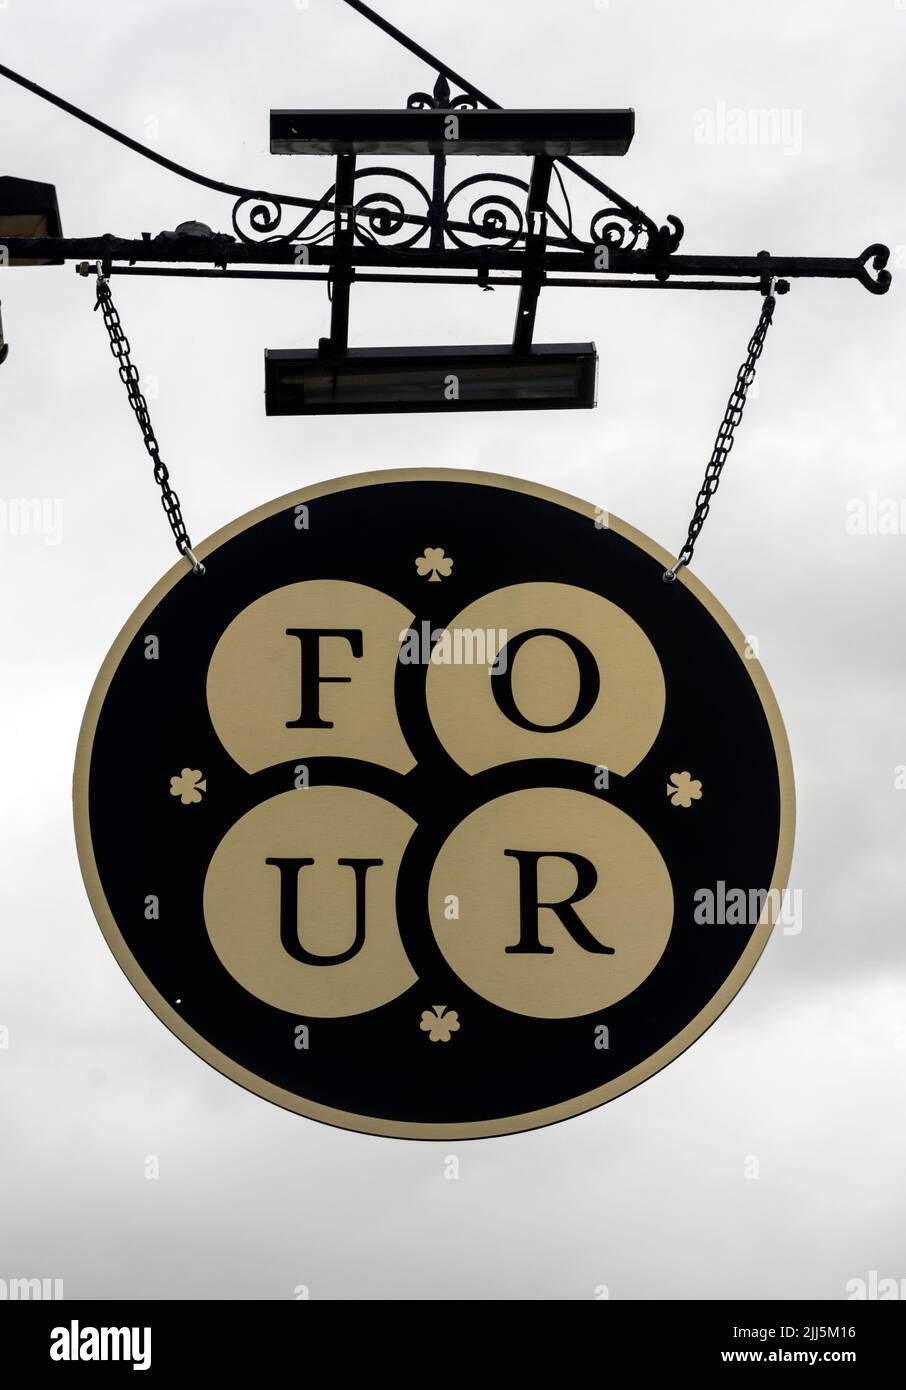 The Old Fourpenny Shop Hotel sign, Warwick, Warwickshire, UK Stock Photo